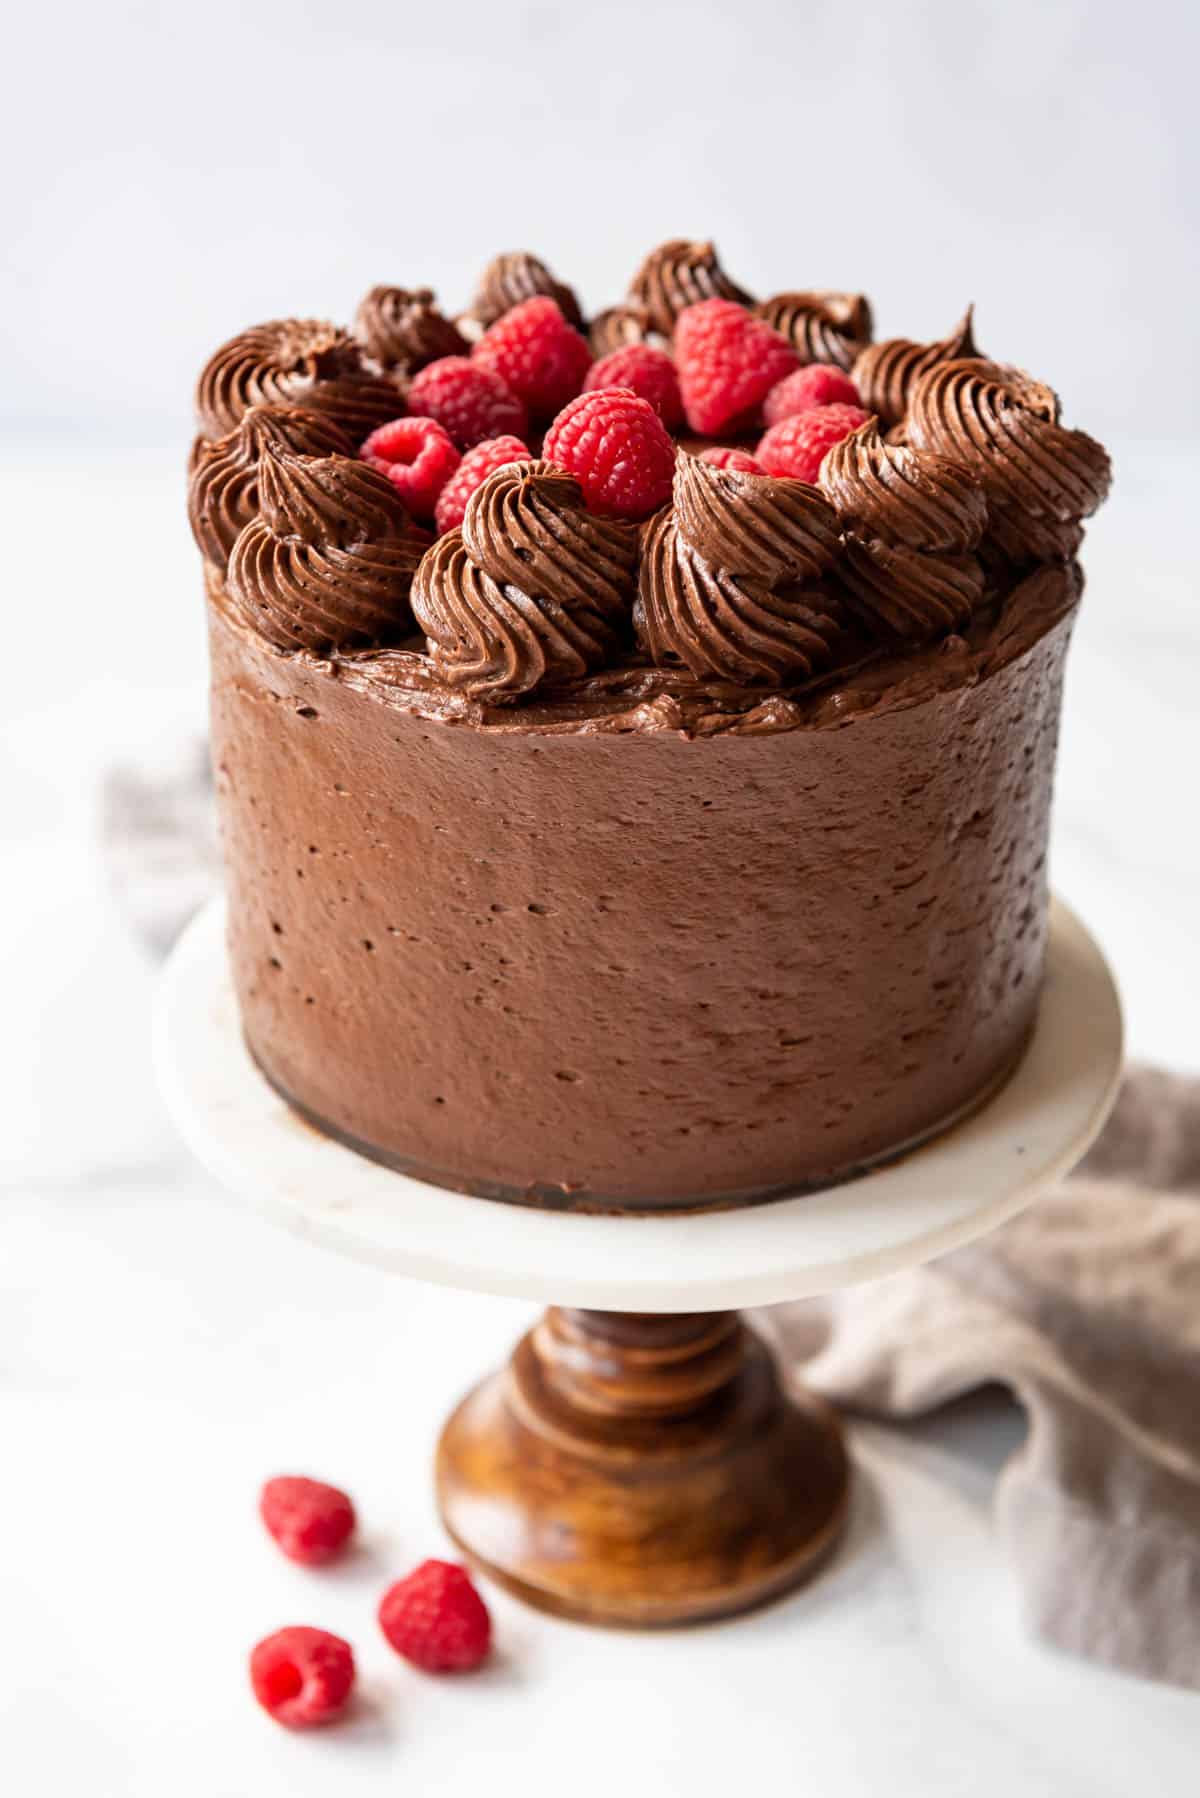 A raspberry chocolate cake decorated with fresh raspberries and swirls of homemade chocolate buttercream on top on a cake stand with three fresh raspberries below it.